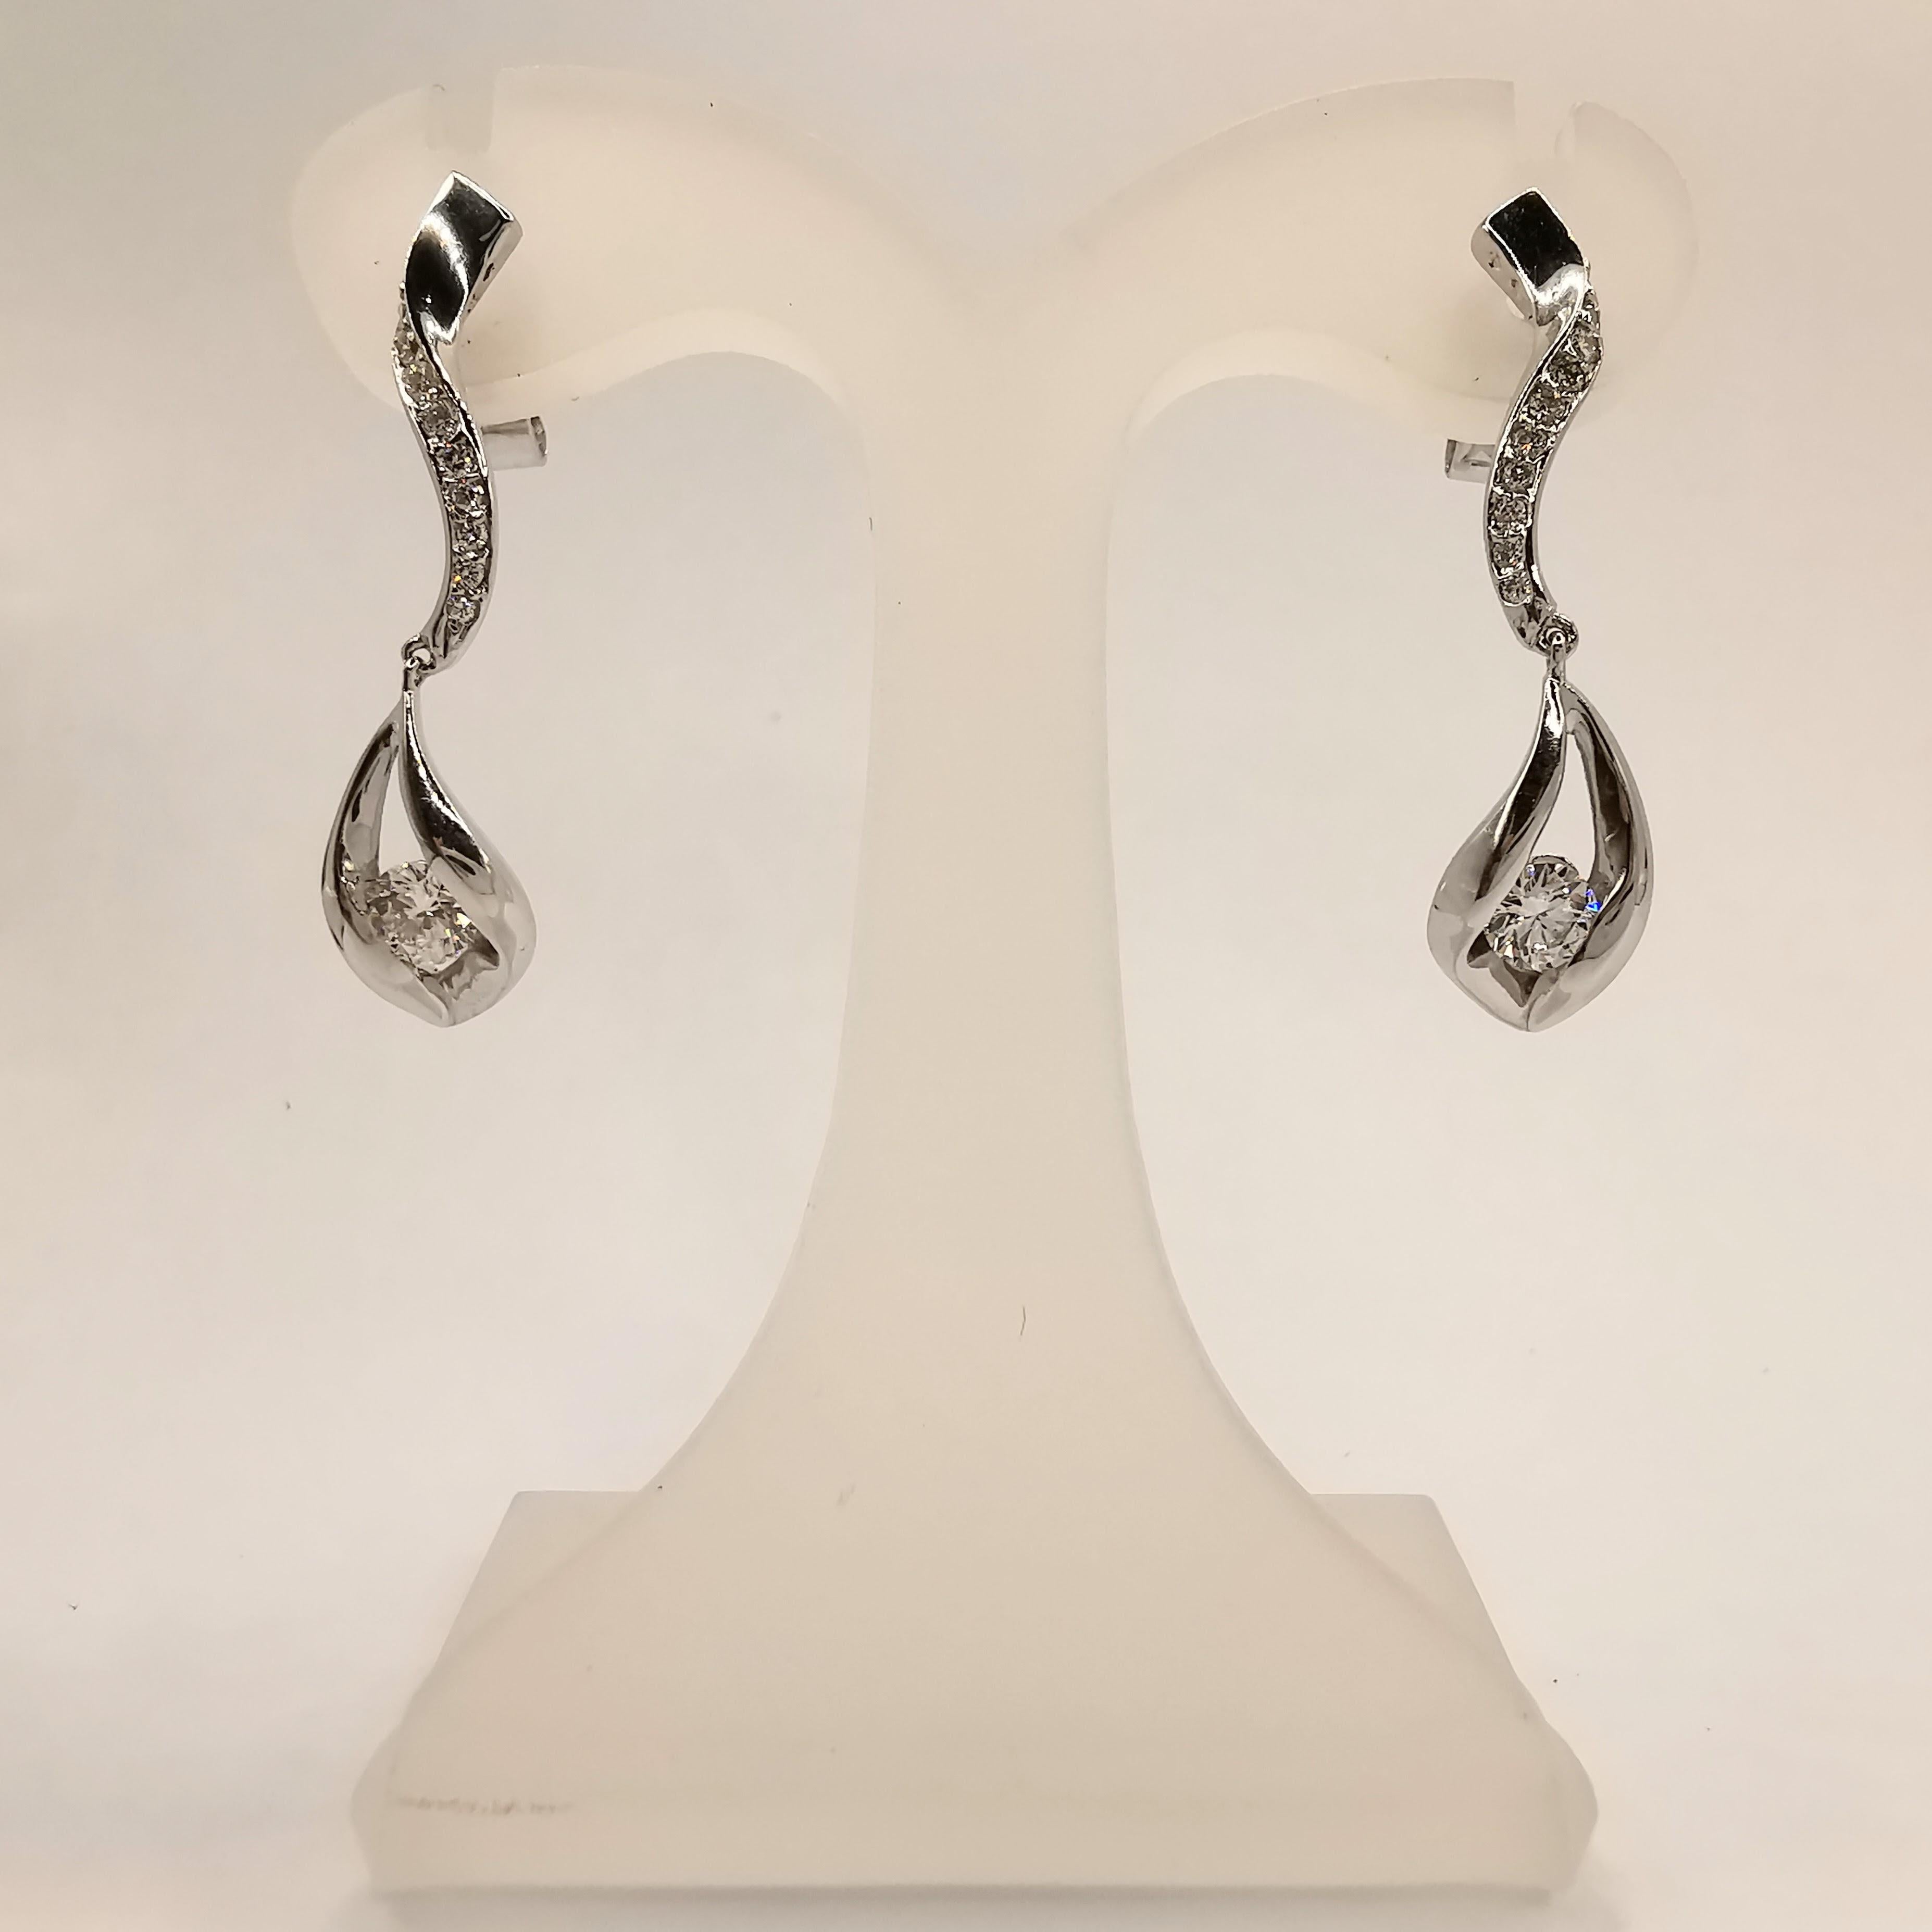 Add a touch of elegance and sophistication to any look with these stunning .65 Carat Diamond Drop Earrings in 18K White Gold. The earrings feature a stylish curve design, creating a modern and eye-catching appearance. The dazzling diamonds are the